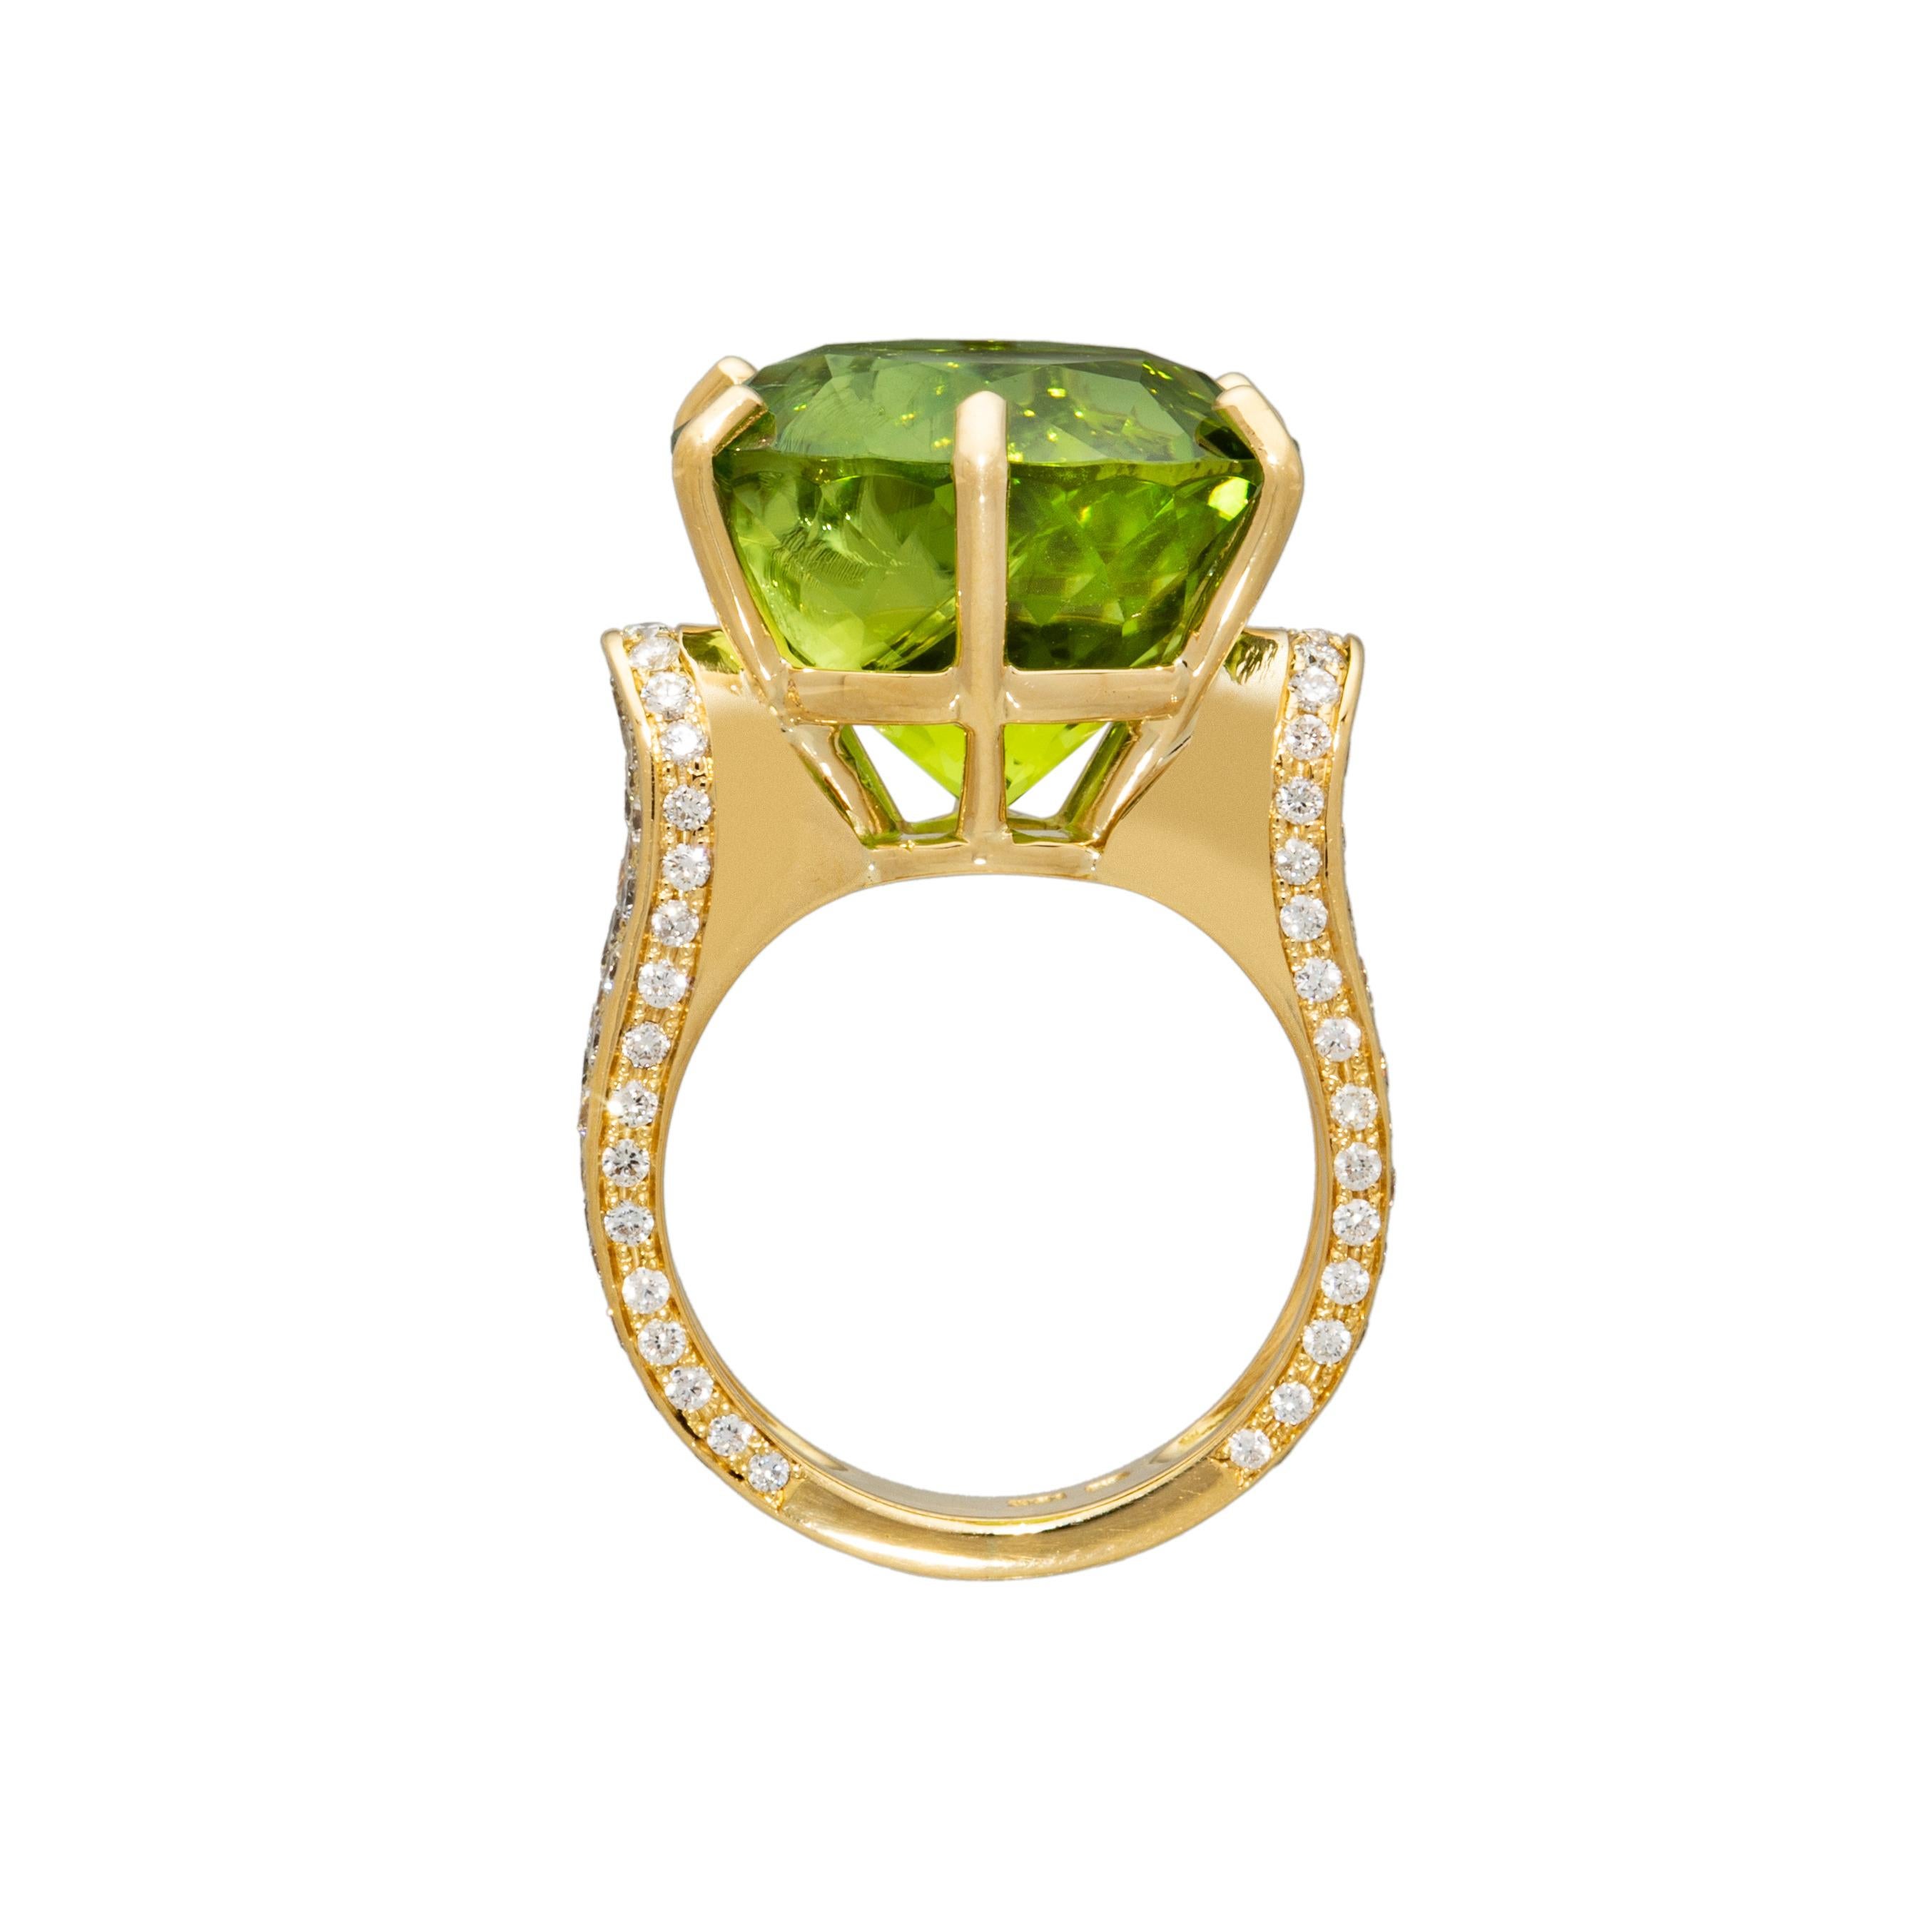 This magnificently bright green peridot ring in 18k yellow gold is an artistic wonder. The large peridot stone, cradled in a six-prong setting, is accentuated with pave-set diamonds down the sides in a cascading wall of brilliance. This trendy ring